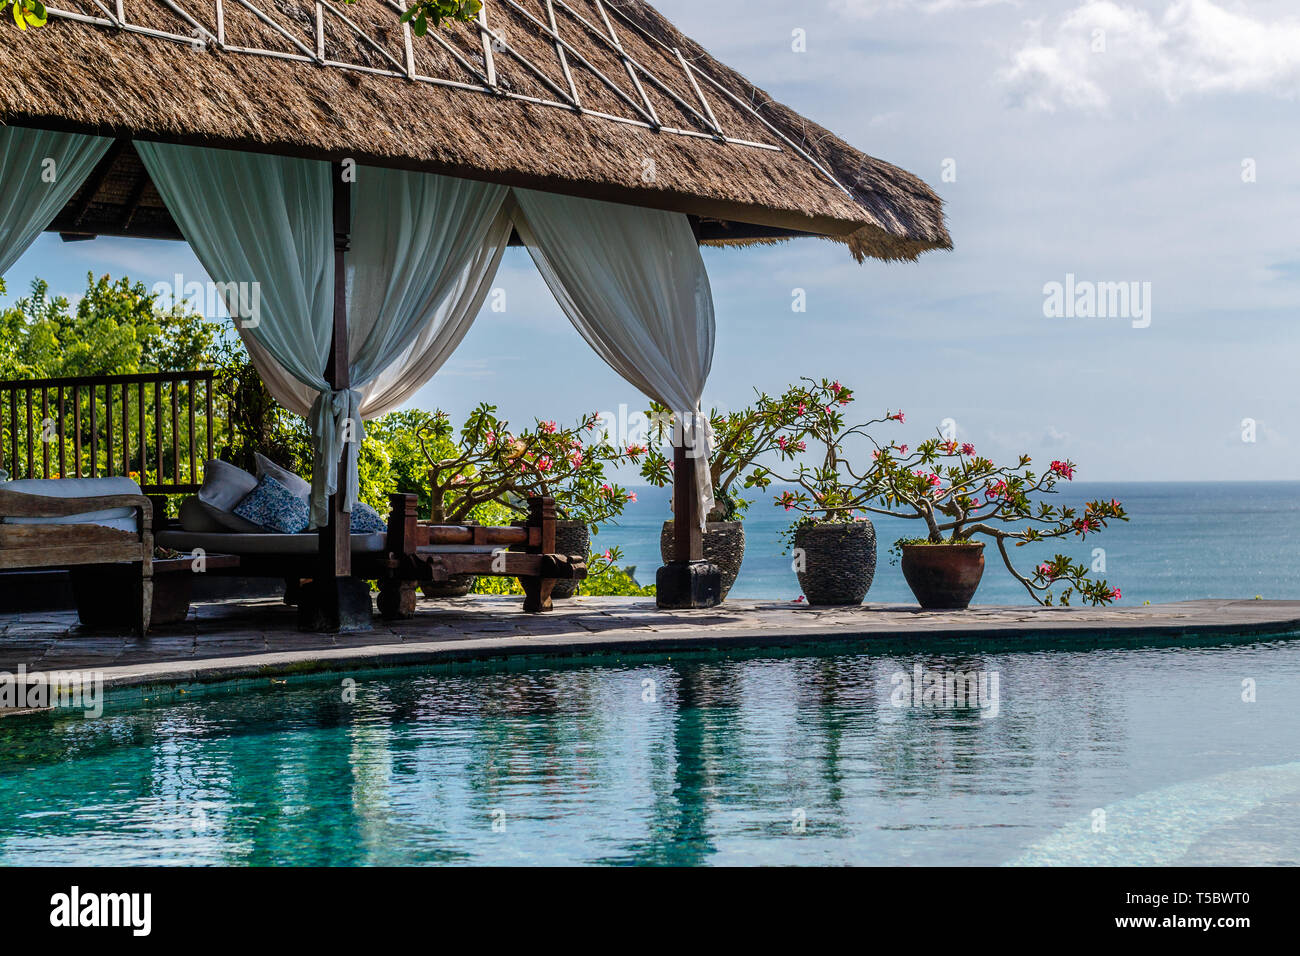 Indonesian bale with beds and flower pots at infinity pool on the cliff with a view of the ocean. Lifestyle, relaxation, tropical holidays. Stock Photo